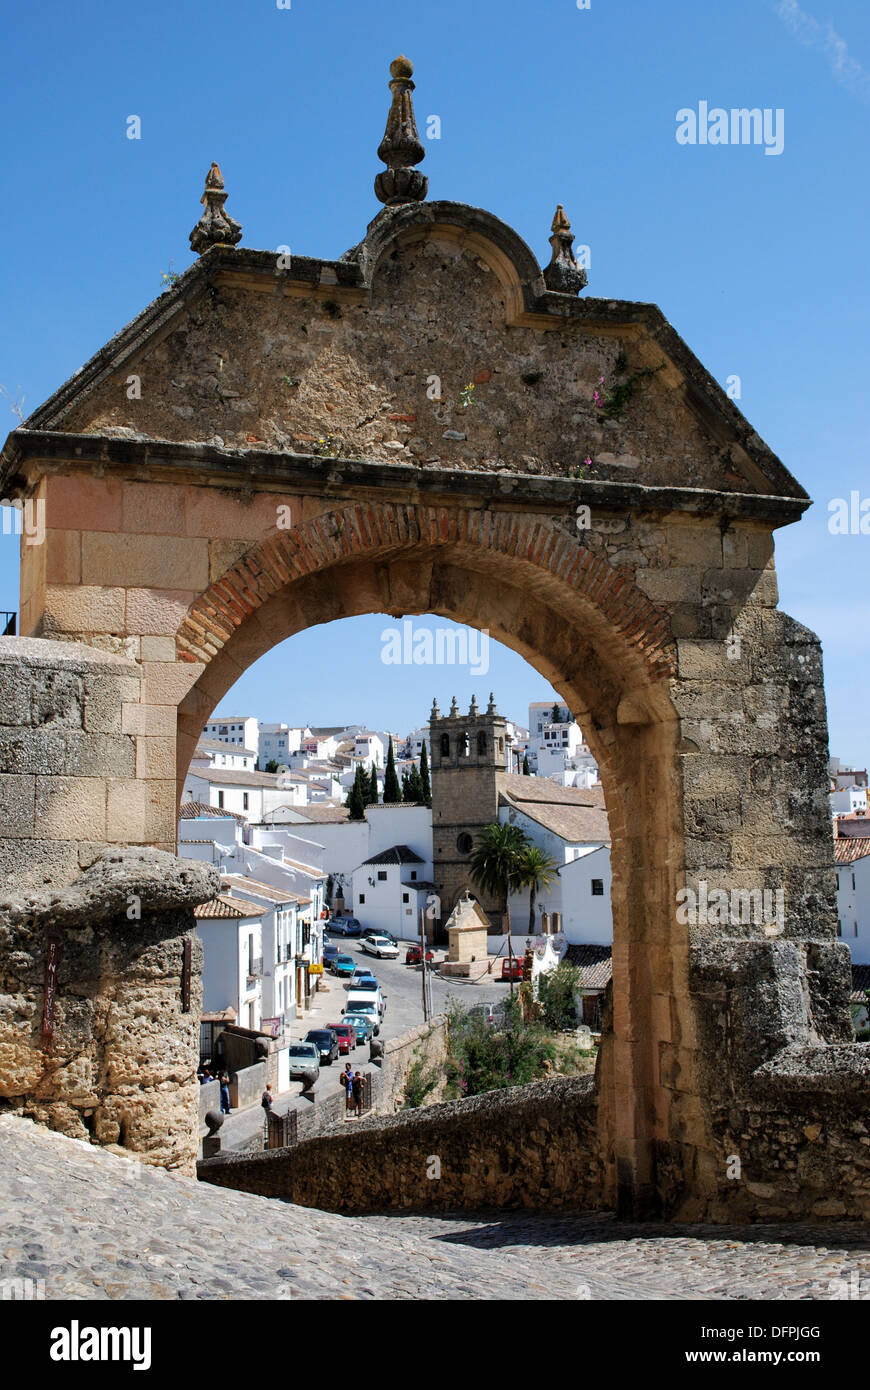 View through the Phillip V arch along the old bridge (Puente Viejo) arch towards the old town, Ronda, Andalusia, Western Europe Stock Photo